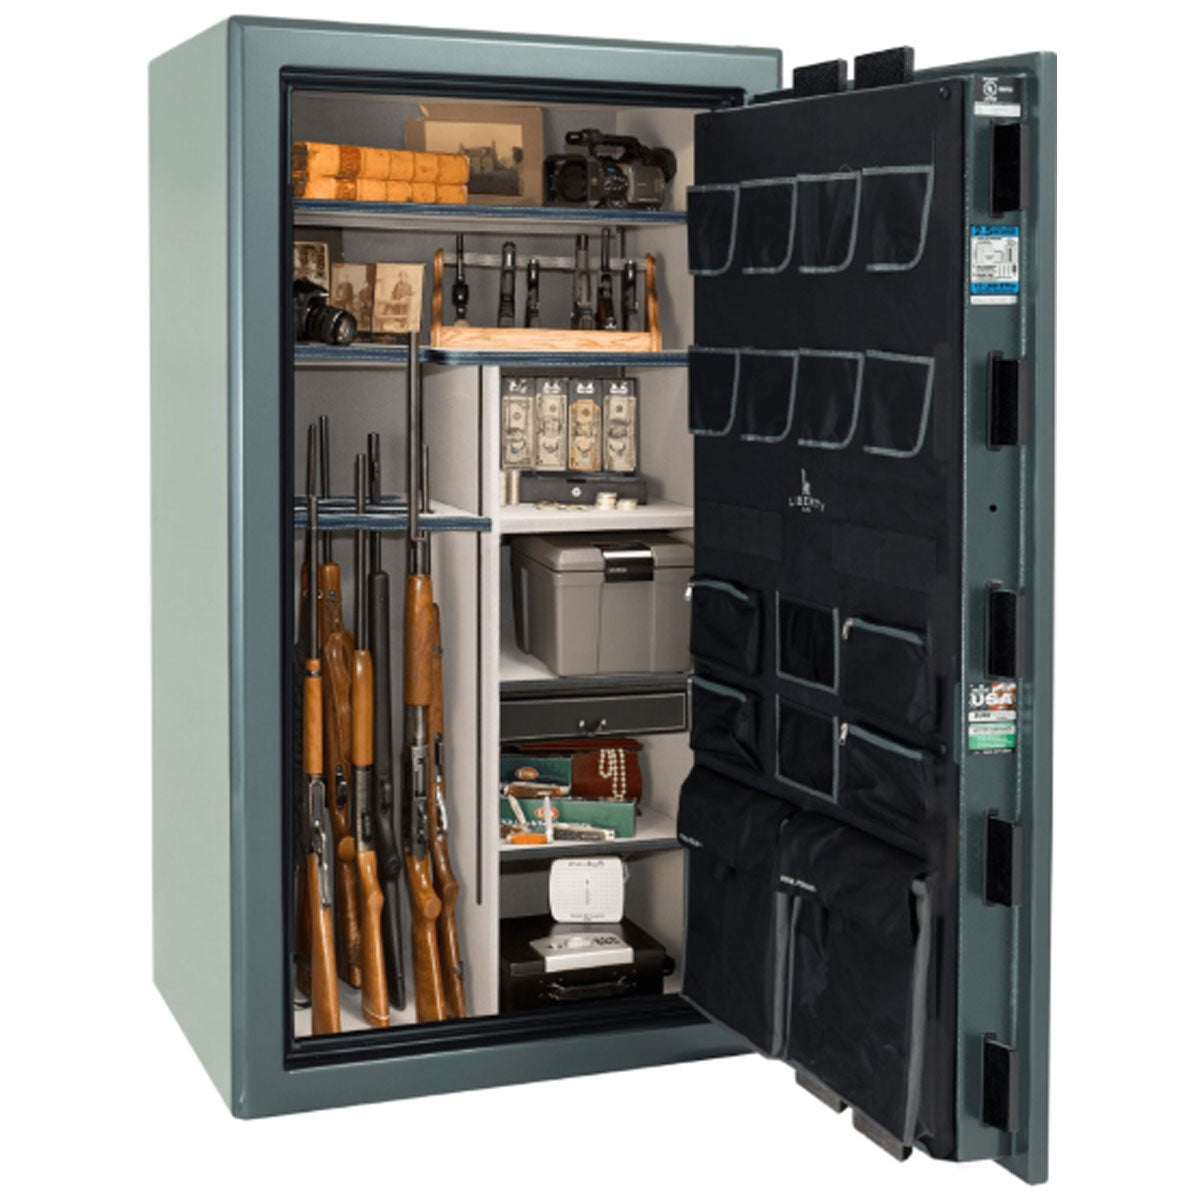 Liberty Safe Presidential 40 in Forest Mist Gloss, open door.